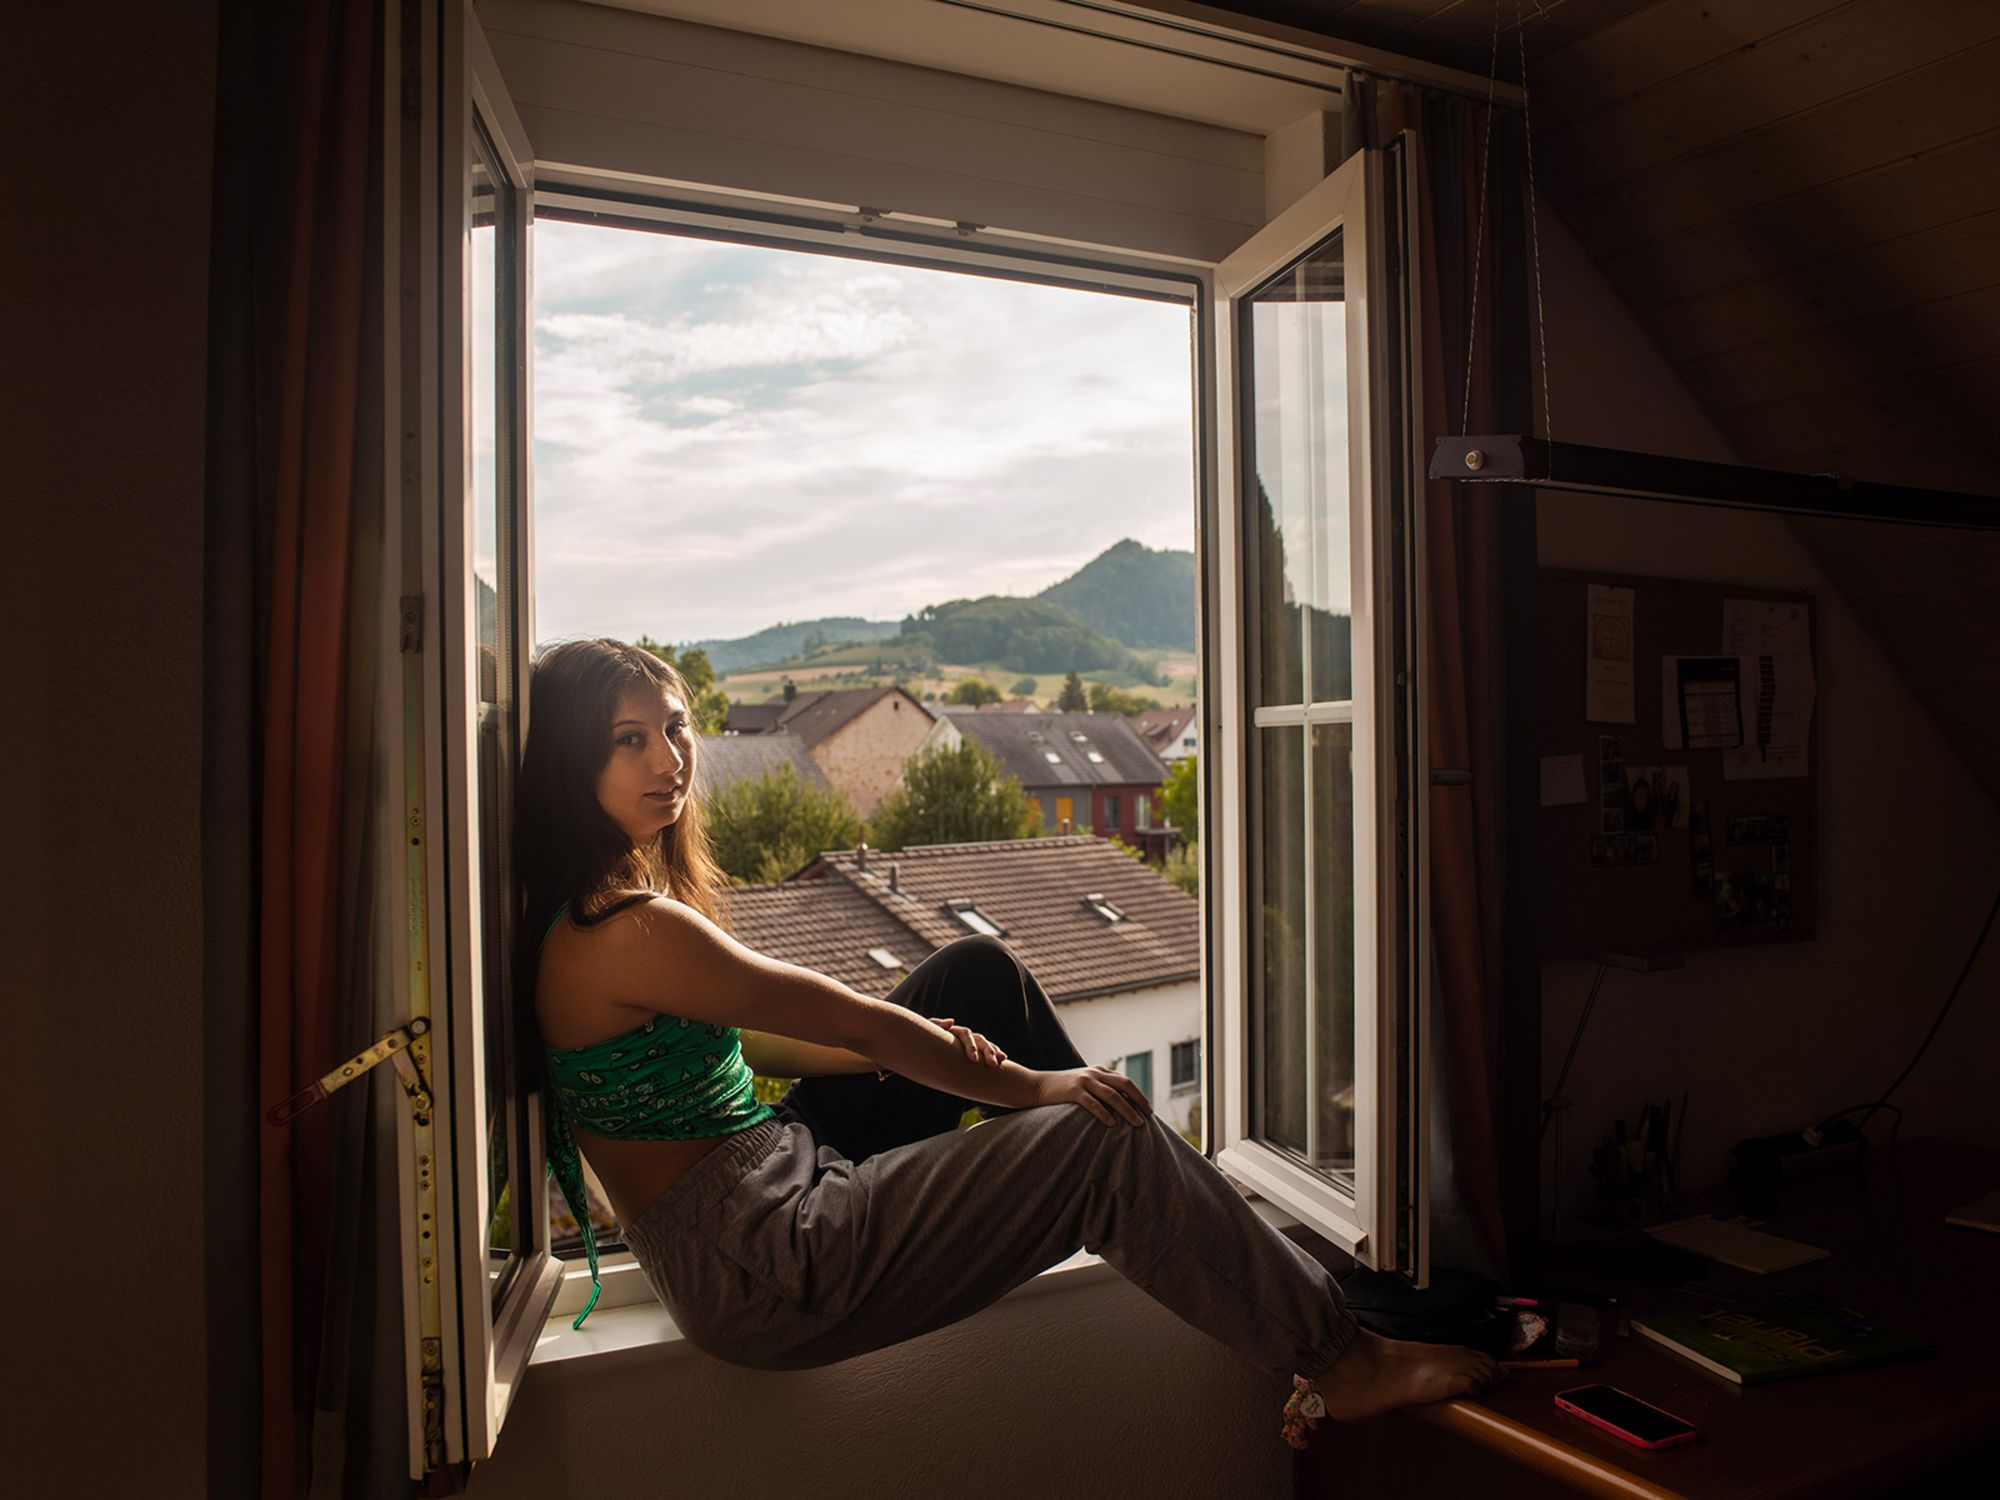 Sofiia, 17, at home in Gipf-Oberfrick, Switzerland in July 2022.